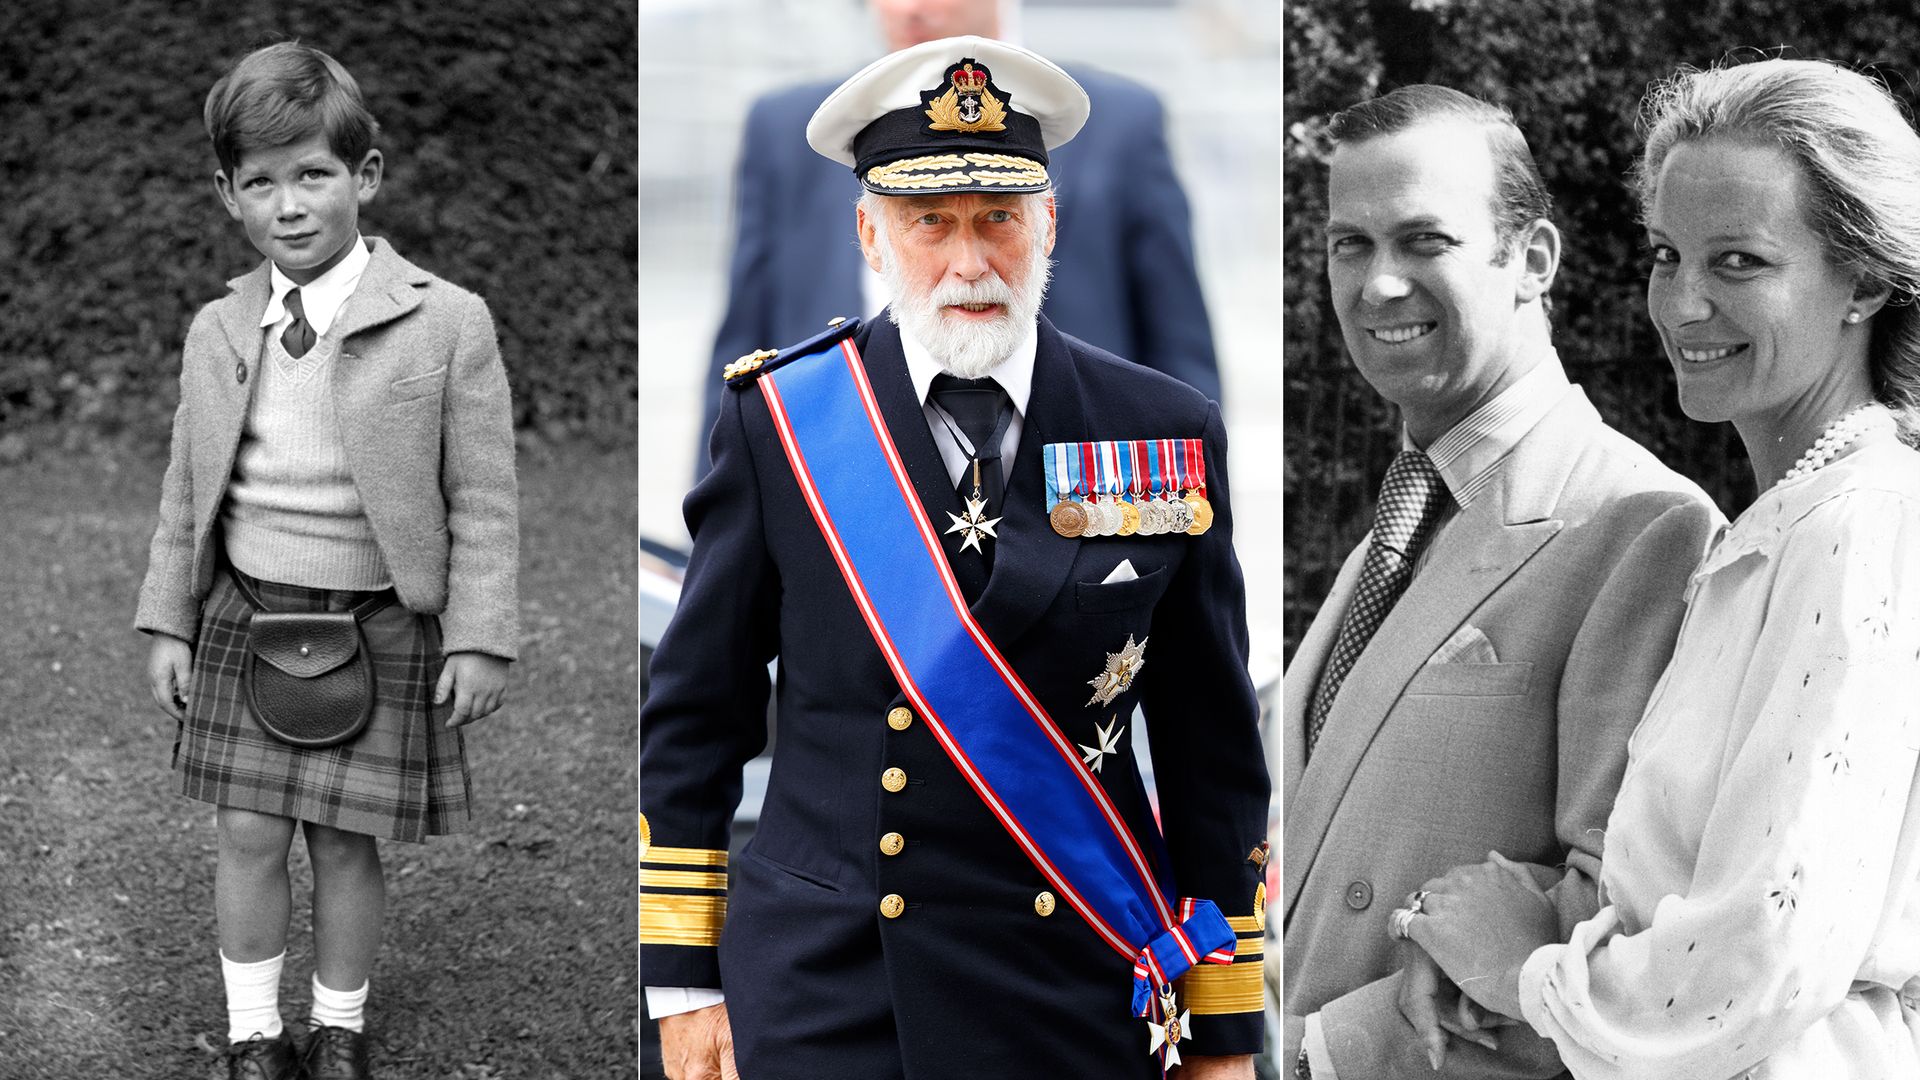 Prince Michael of Kent's life in photos